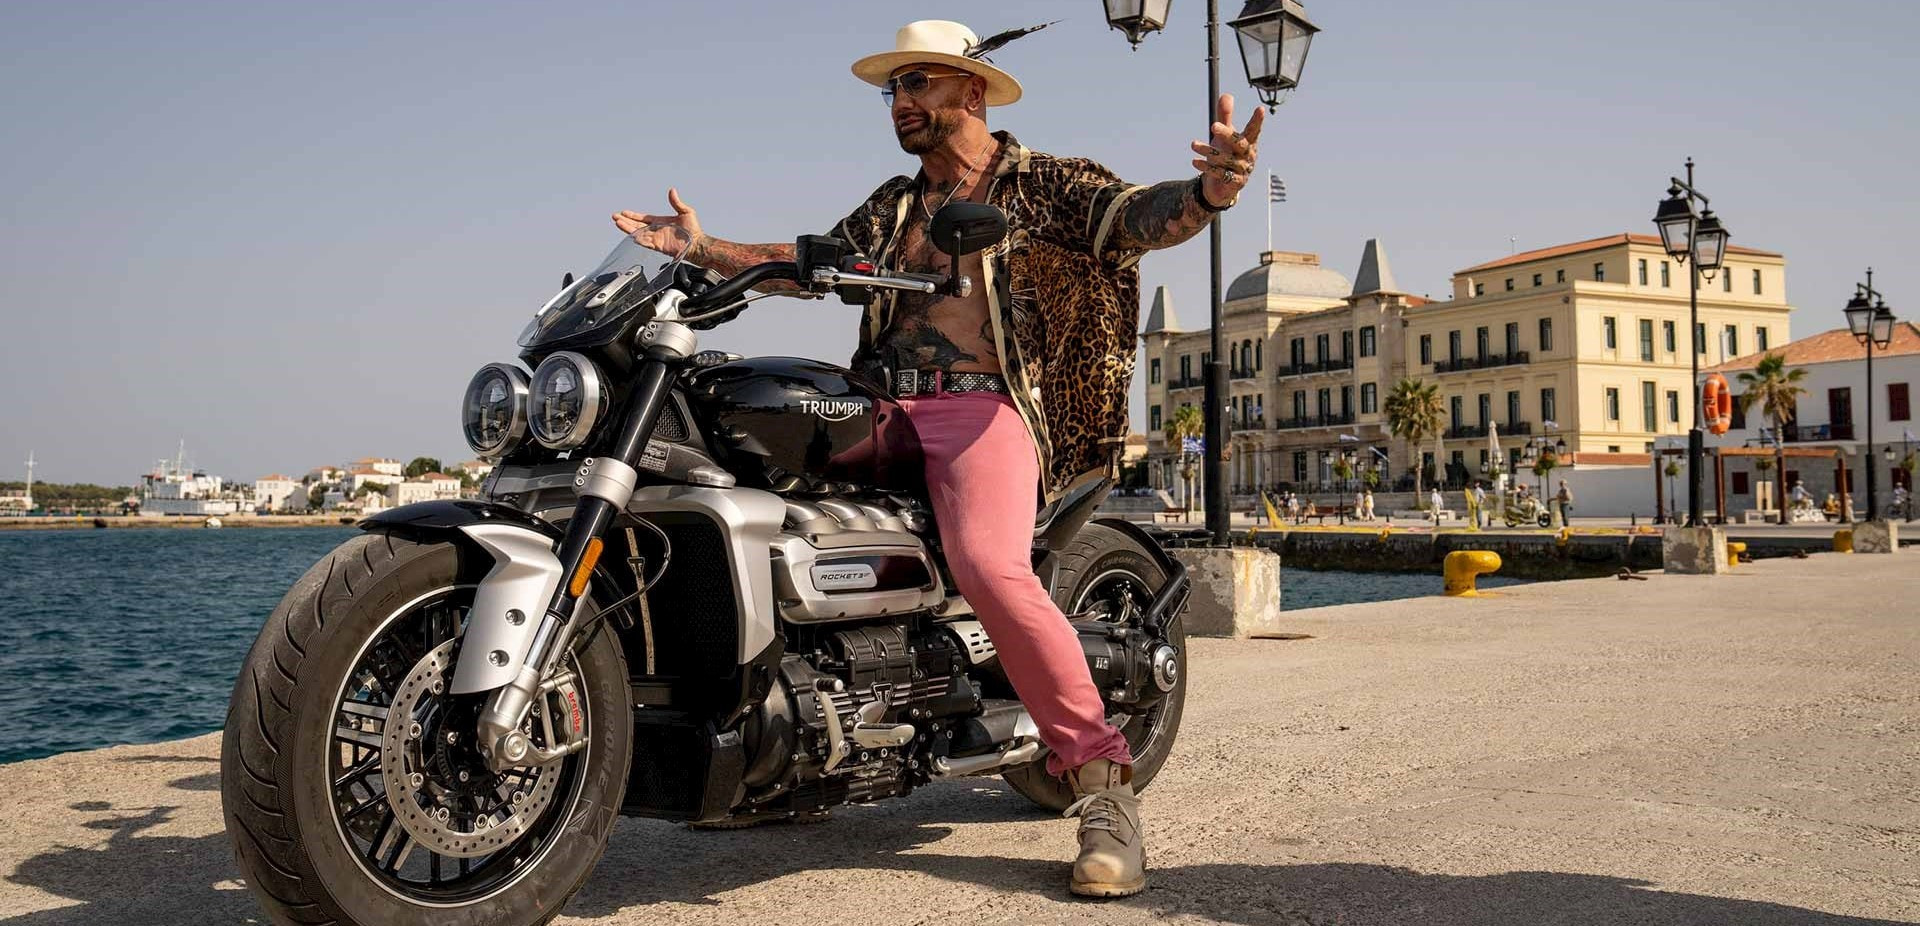 David Bautista rides the Triumph Rocket in Glass Onion: A Knives Out Mystery, on Netlfix.